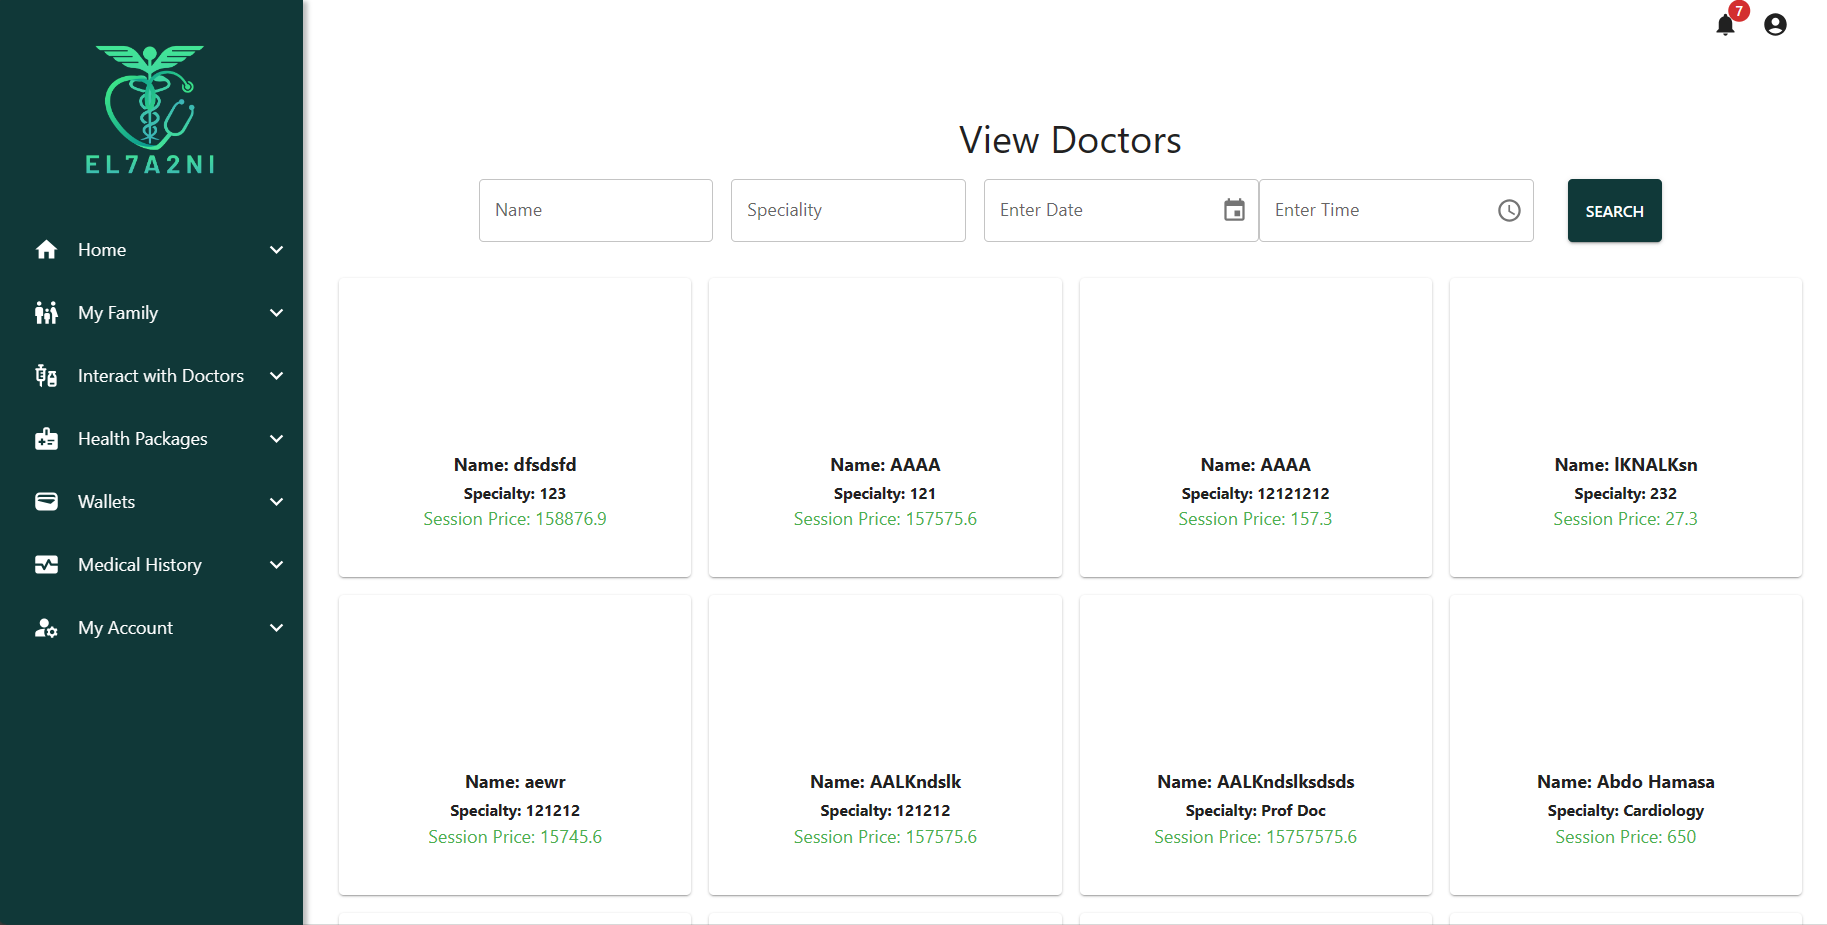 PView all doctors